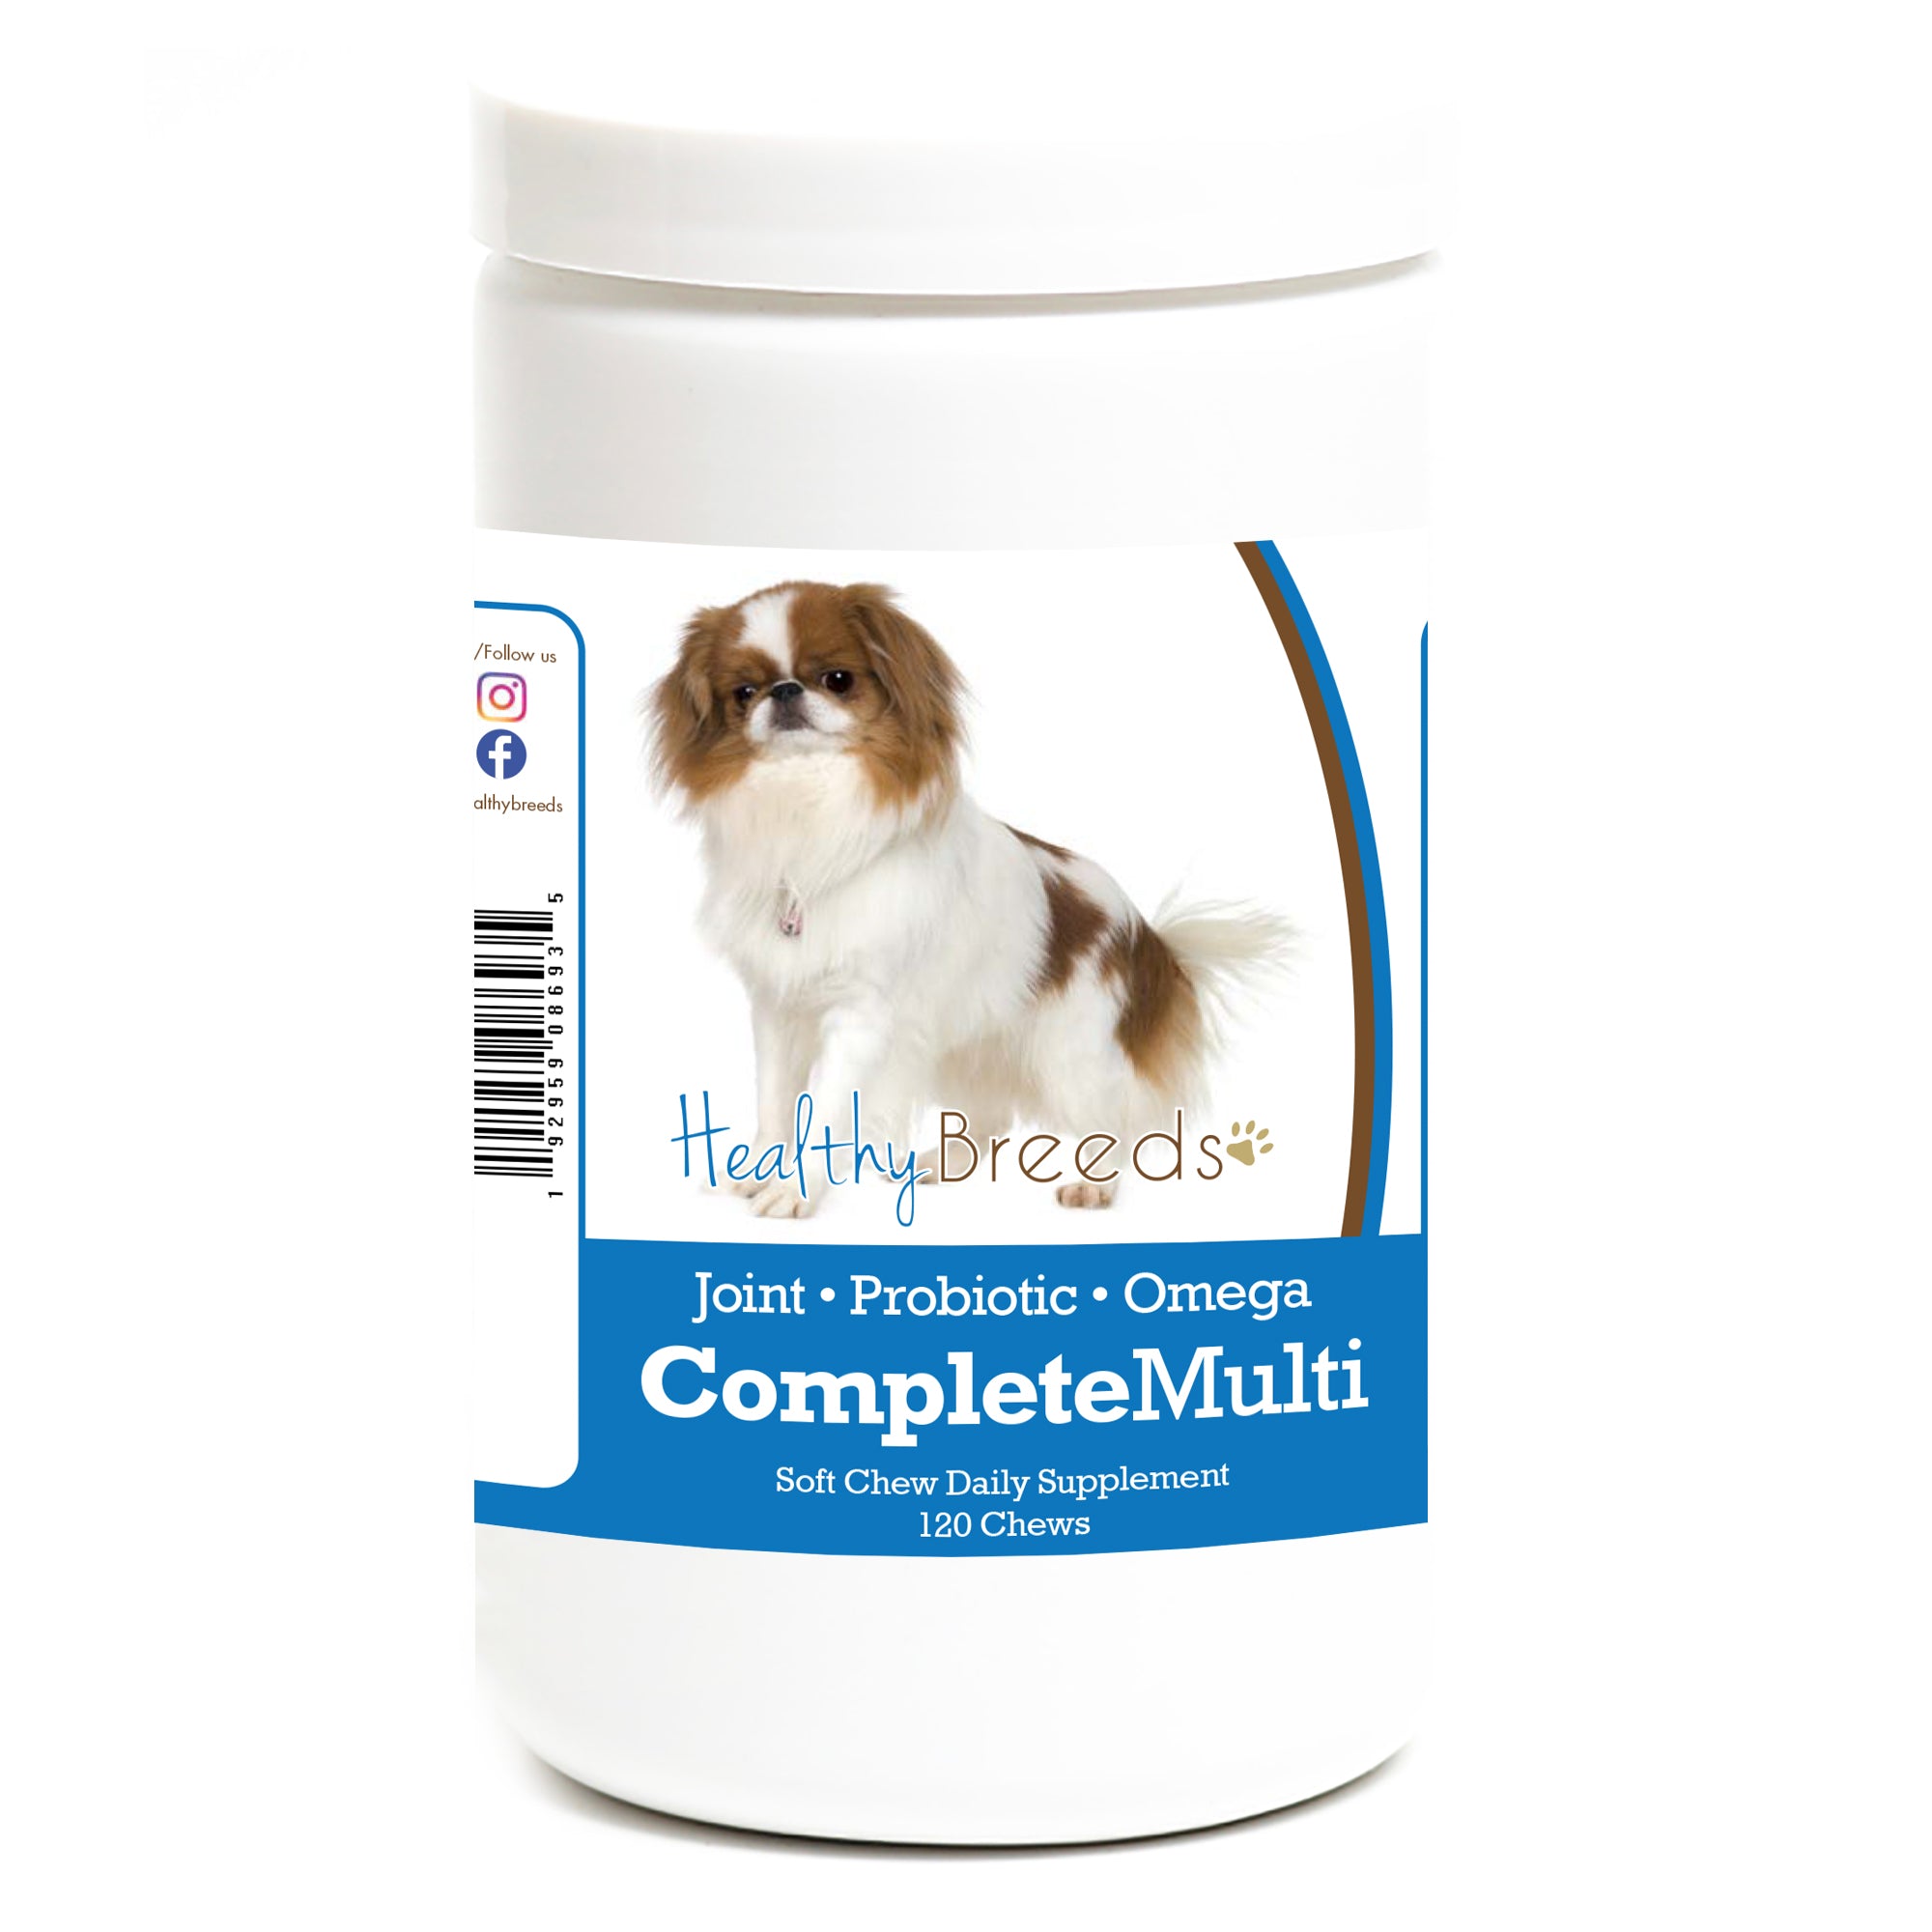 Japanese Chin All In One Multivitamin Soft Chew 120 Count